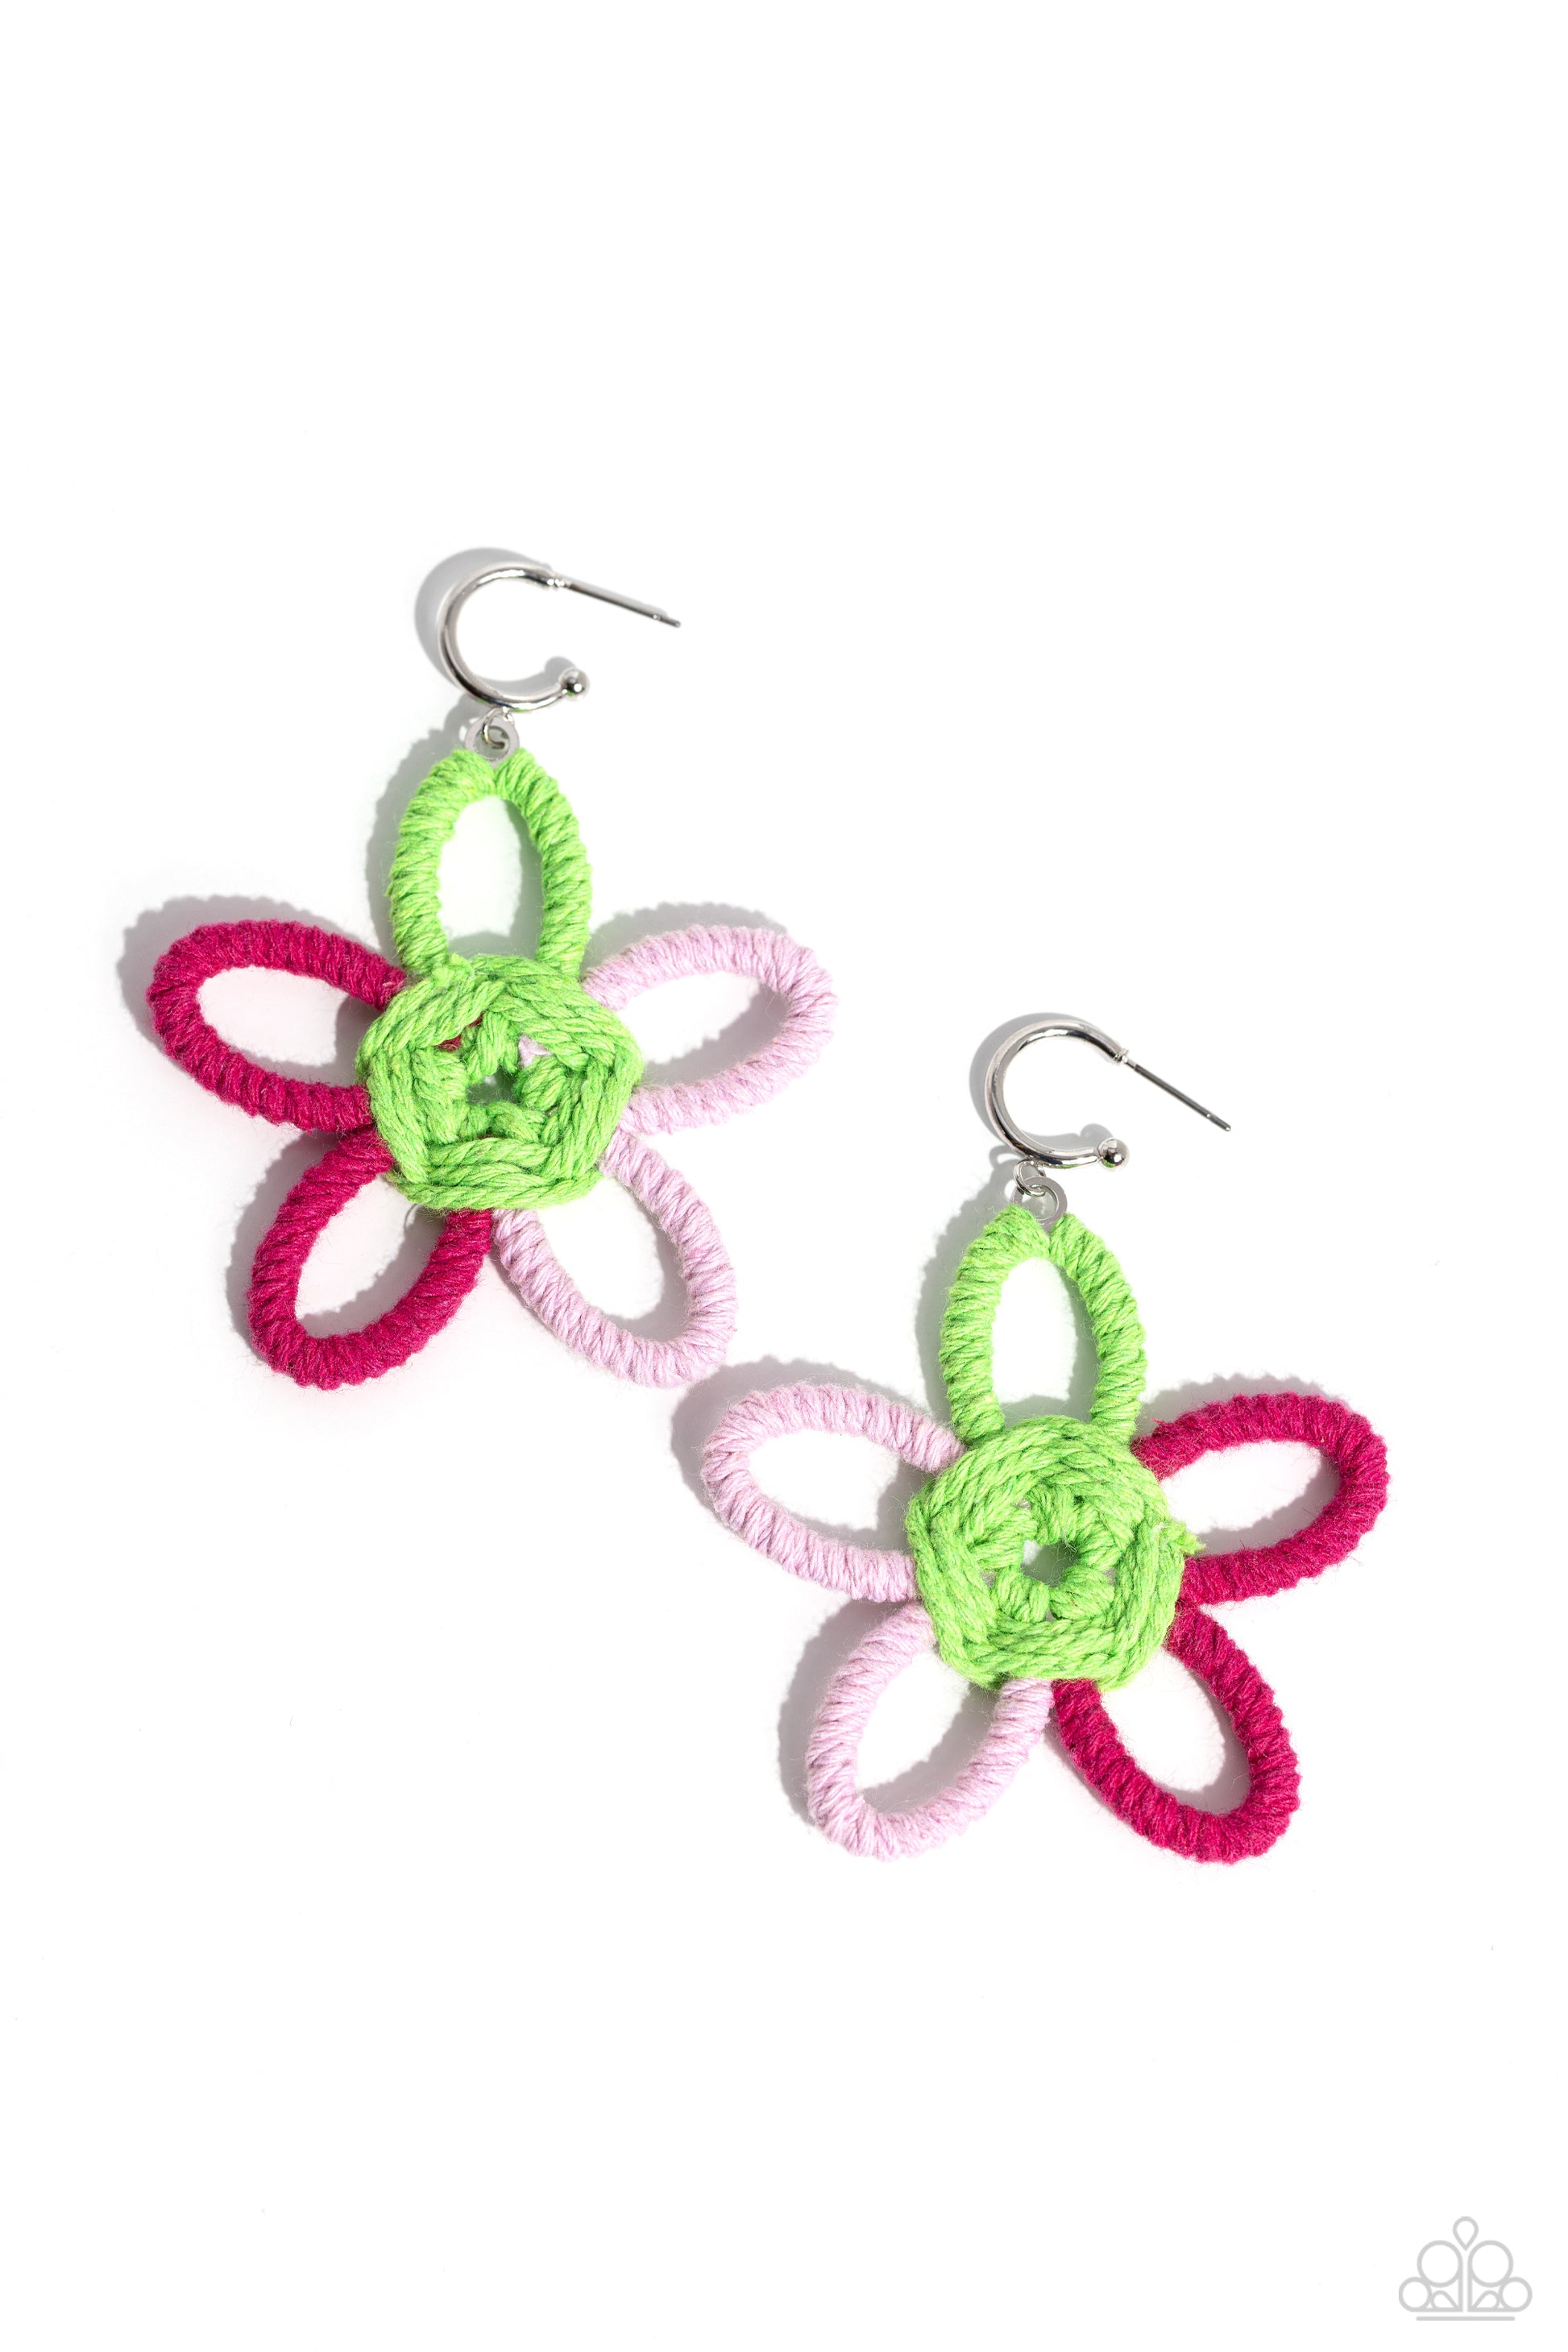 Paparazzi Accessories - Spin a Yarn - Pink Earrinyarfeaturing Kohlrabi, light pink, and Pink Peacock yarn, an oversized flower swings freely from a dainty silver hoop, creating a playful lure. Earring attaches to a standard post fitting. Hoop measures approximately 1/2" in diameter.  Sold as one pair of hoop earrings.